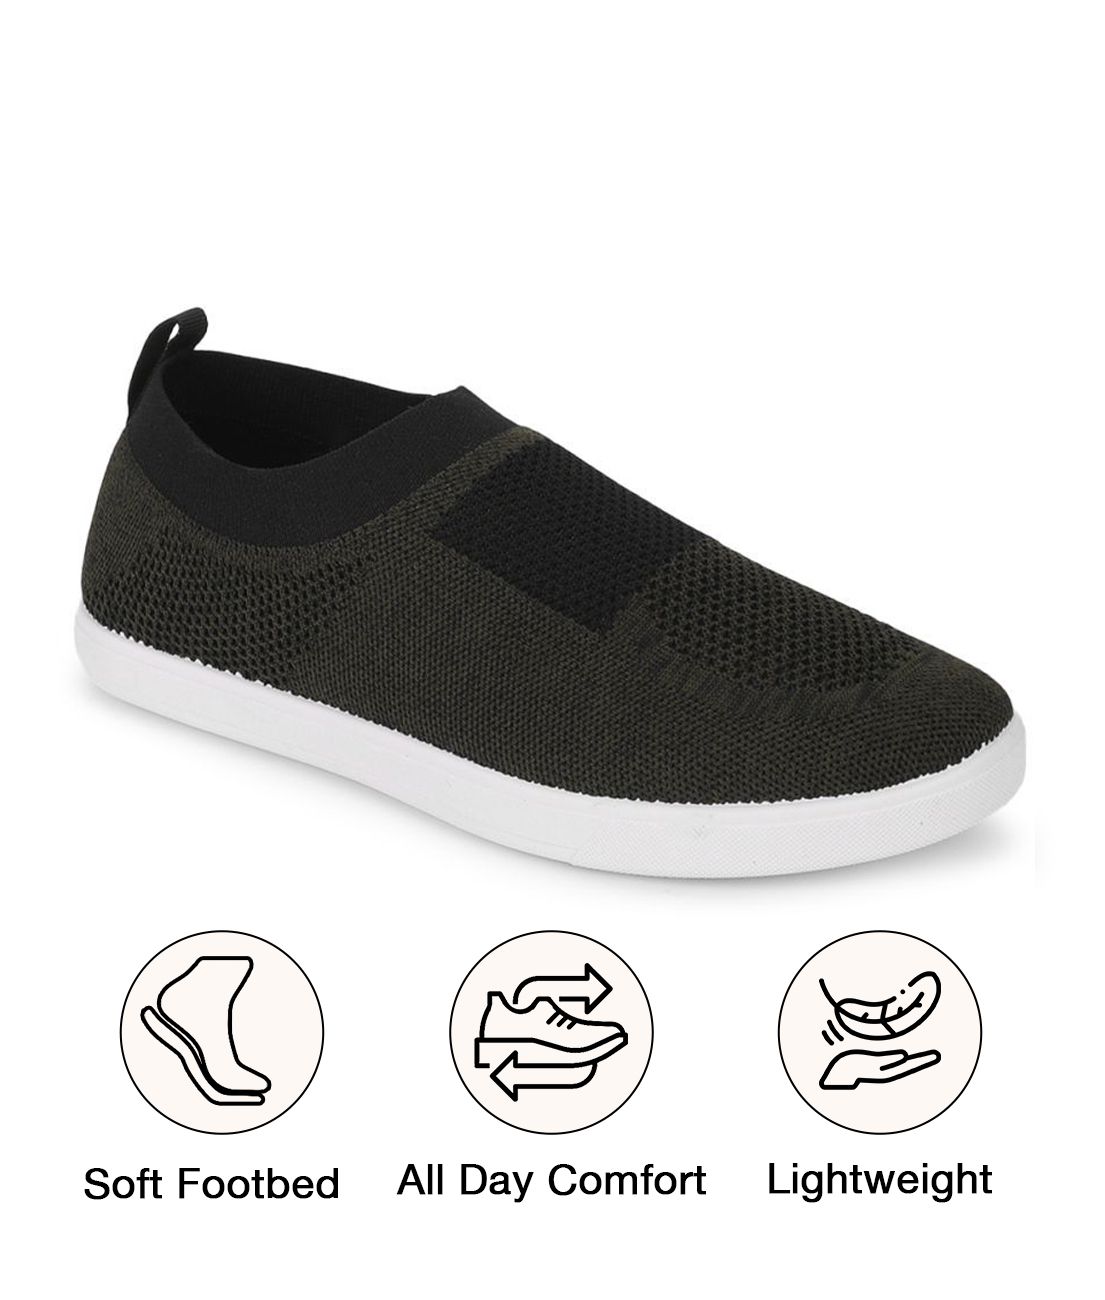     			UrbanMark Men Comfortable Textured Knitted Casual Slip-On Shoes-Black